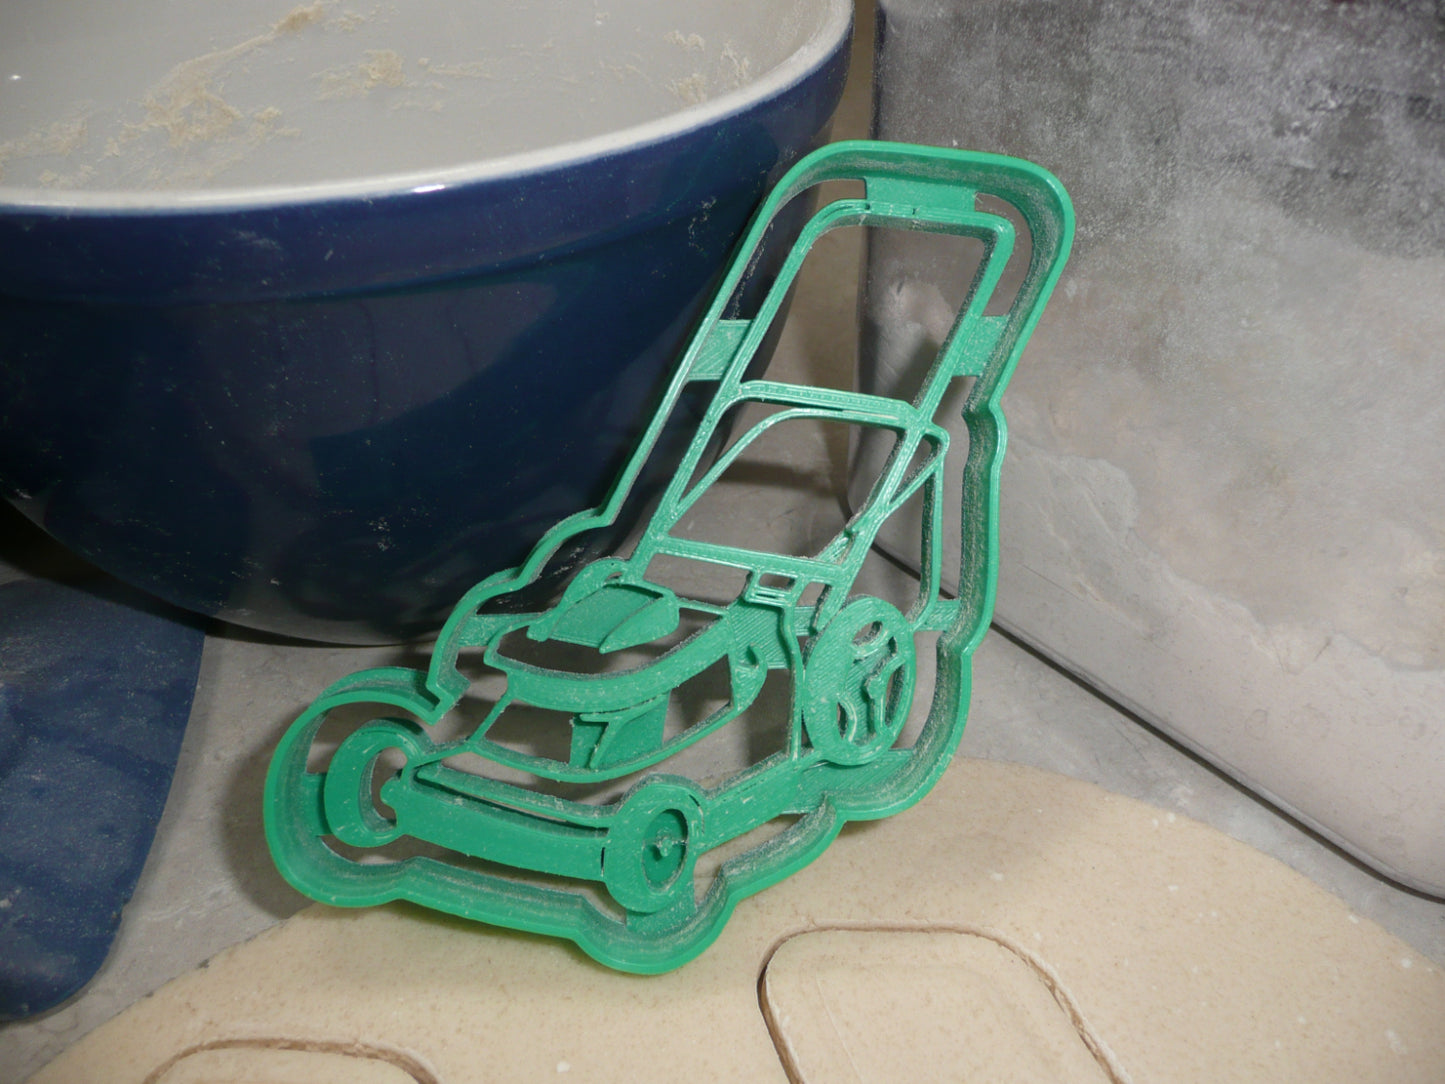 Push Mower Lawn Yard Care Equipment Cookie Cutter Made In USA PR4671